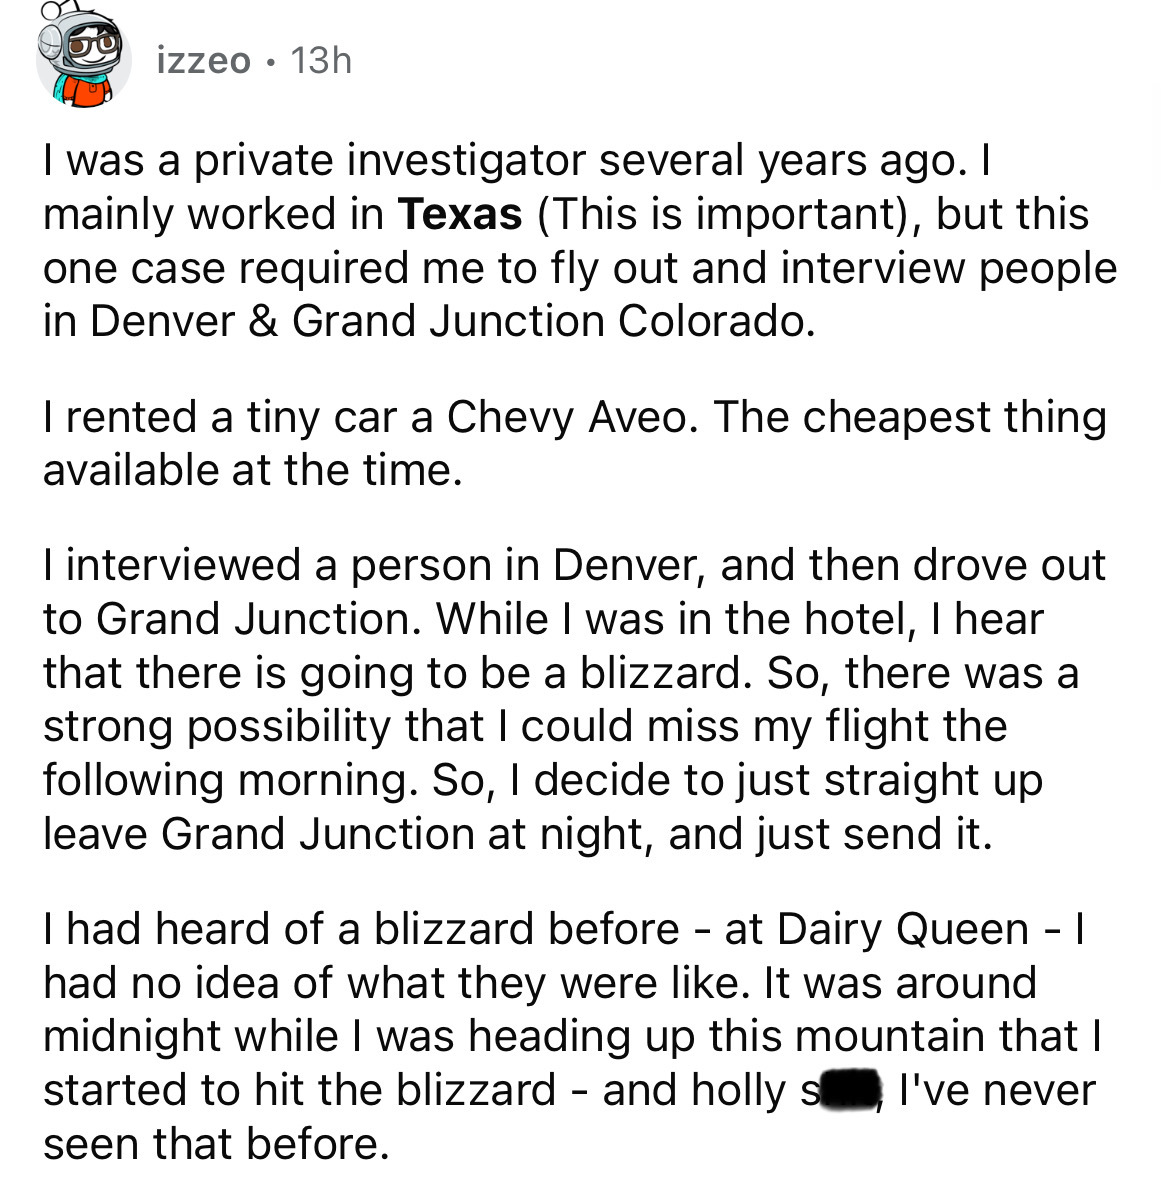 number - izzeo 13h . I was a private investigator several years ago. I mainly worked in Texas This is important, but this one case required me to fly out and interview people in Denver & Grand Junction Colorado. I rented a tiny car a Chevy Aveo. The cheap